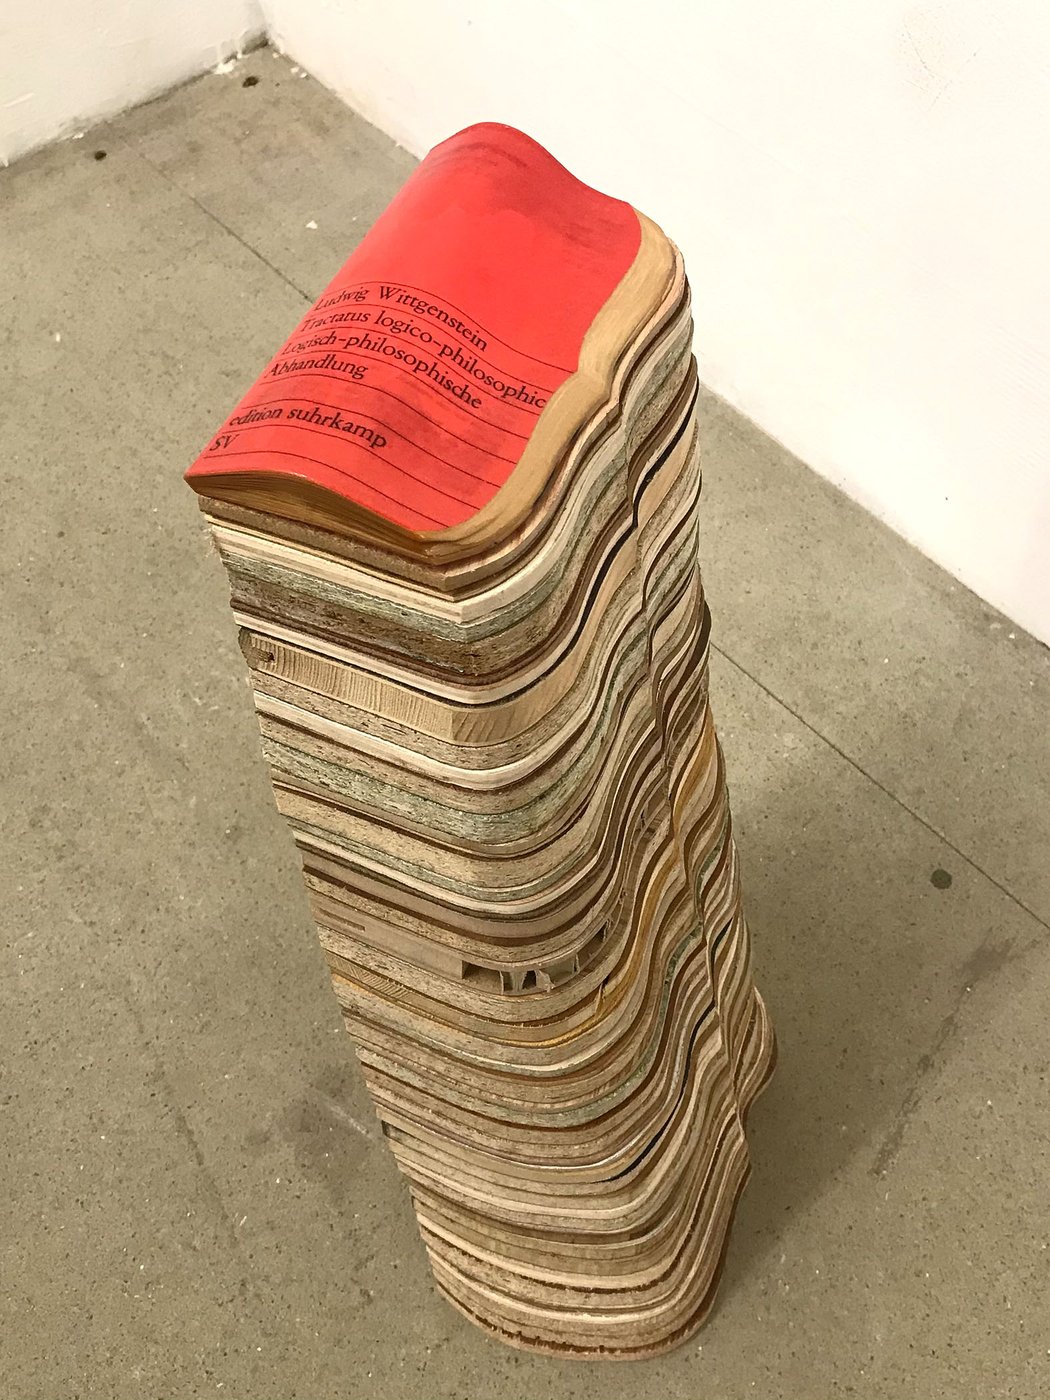 On display is a 65 cm high tower built from 50 layers of wood. The individual layers stand out visually from each other due to their different colours and types of wood. The top layer shows the cover of Wittgenstein's book “Tractatus logico-philosophicus” from edition suhrkamp in red. The tower was milled along the right side in the form of a curved bracket. The photo was taken from diagonally above right.